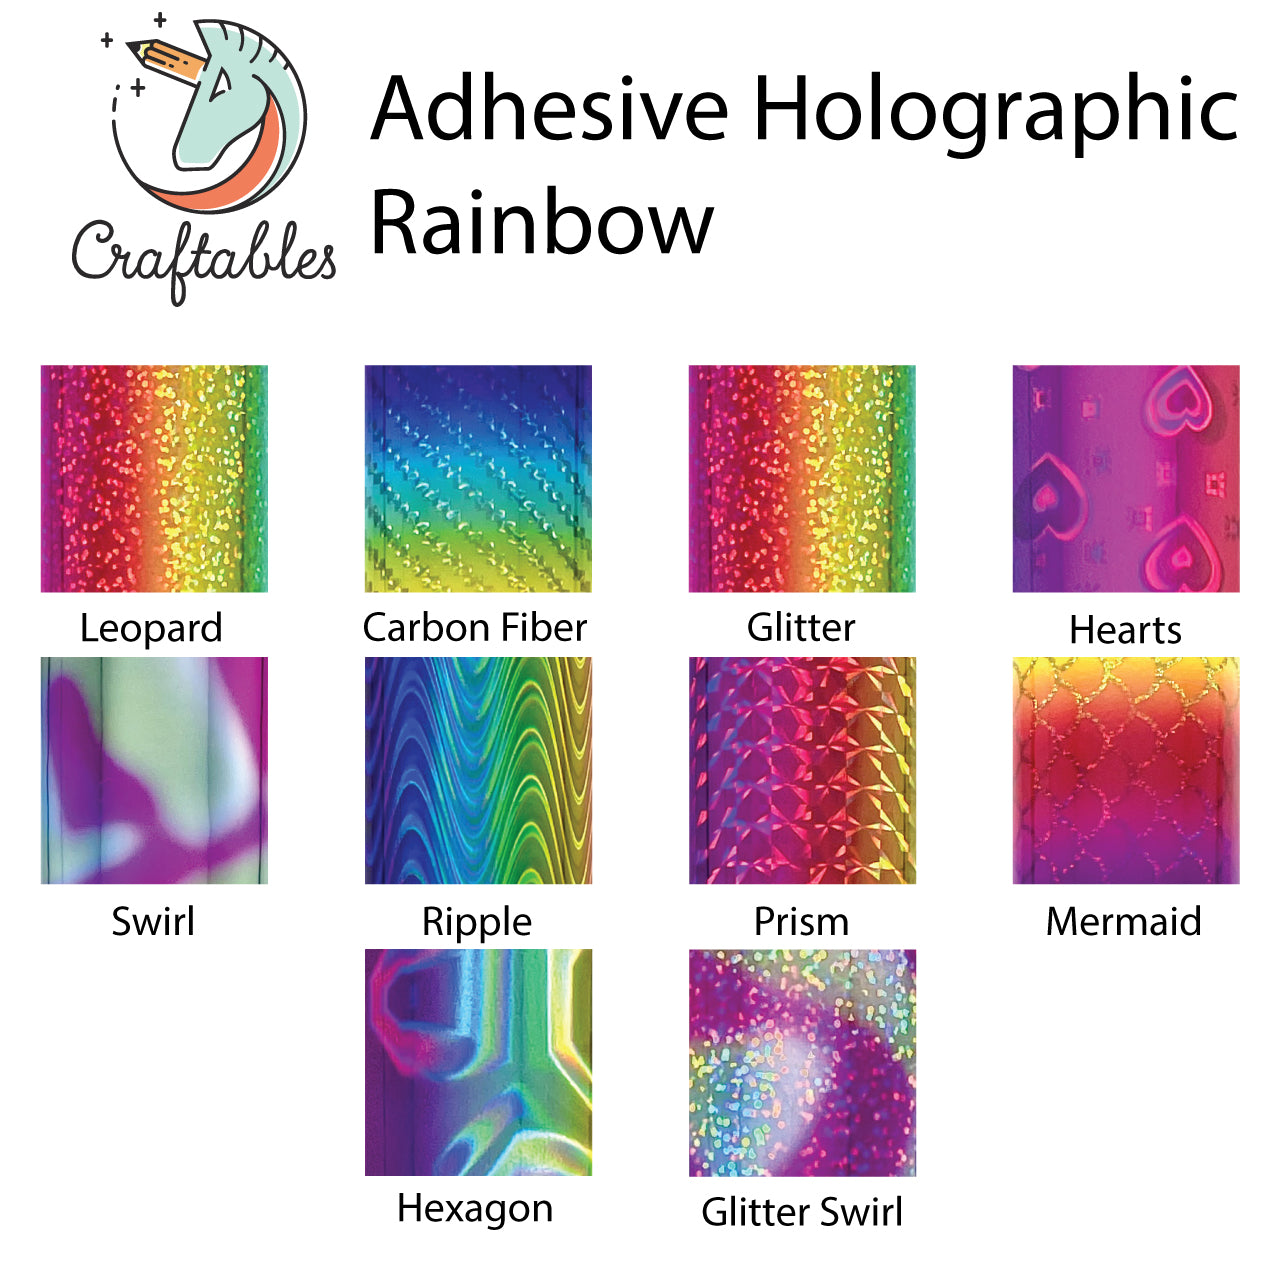 Glitter Swirl Rainbow Holographic Adhesive Vinyl Sheets By Craftables